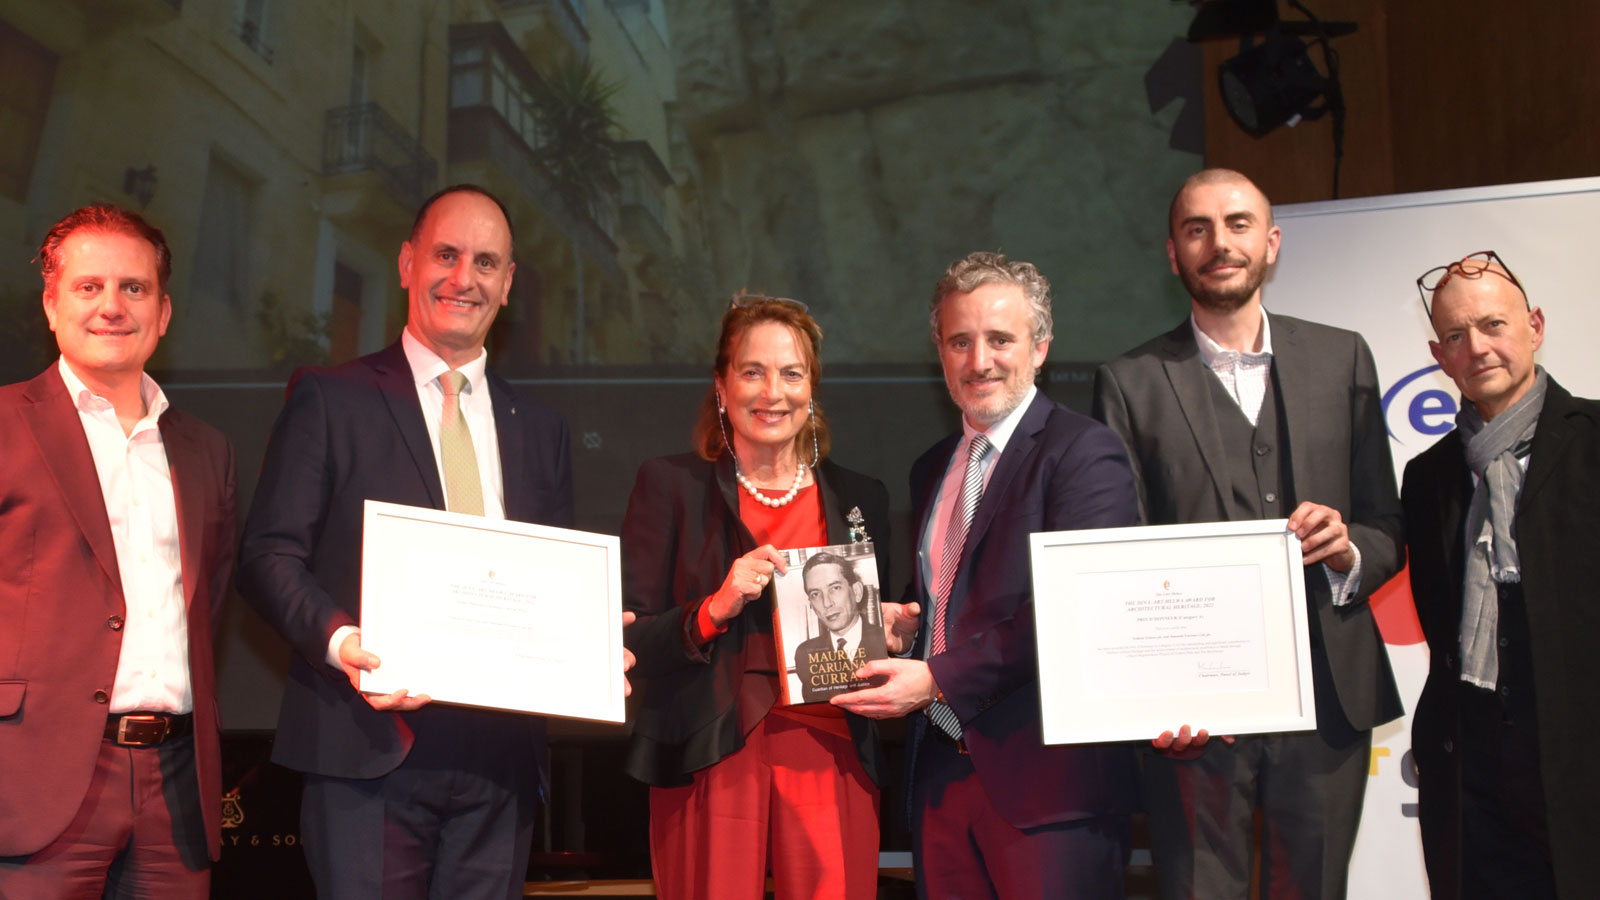 The Brewhouse and Trident Park project wins overall Judge Maurice Caruana Curran Prize 